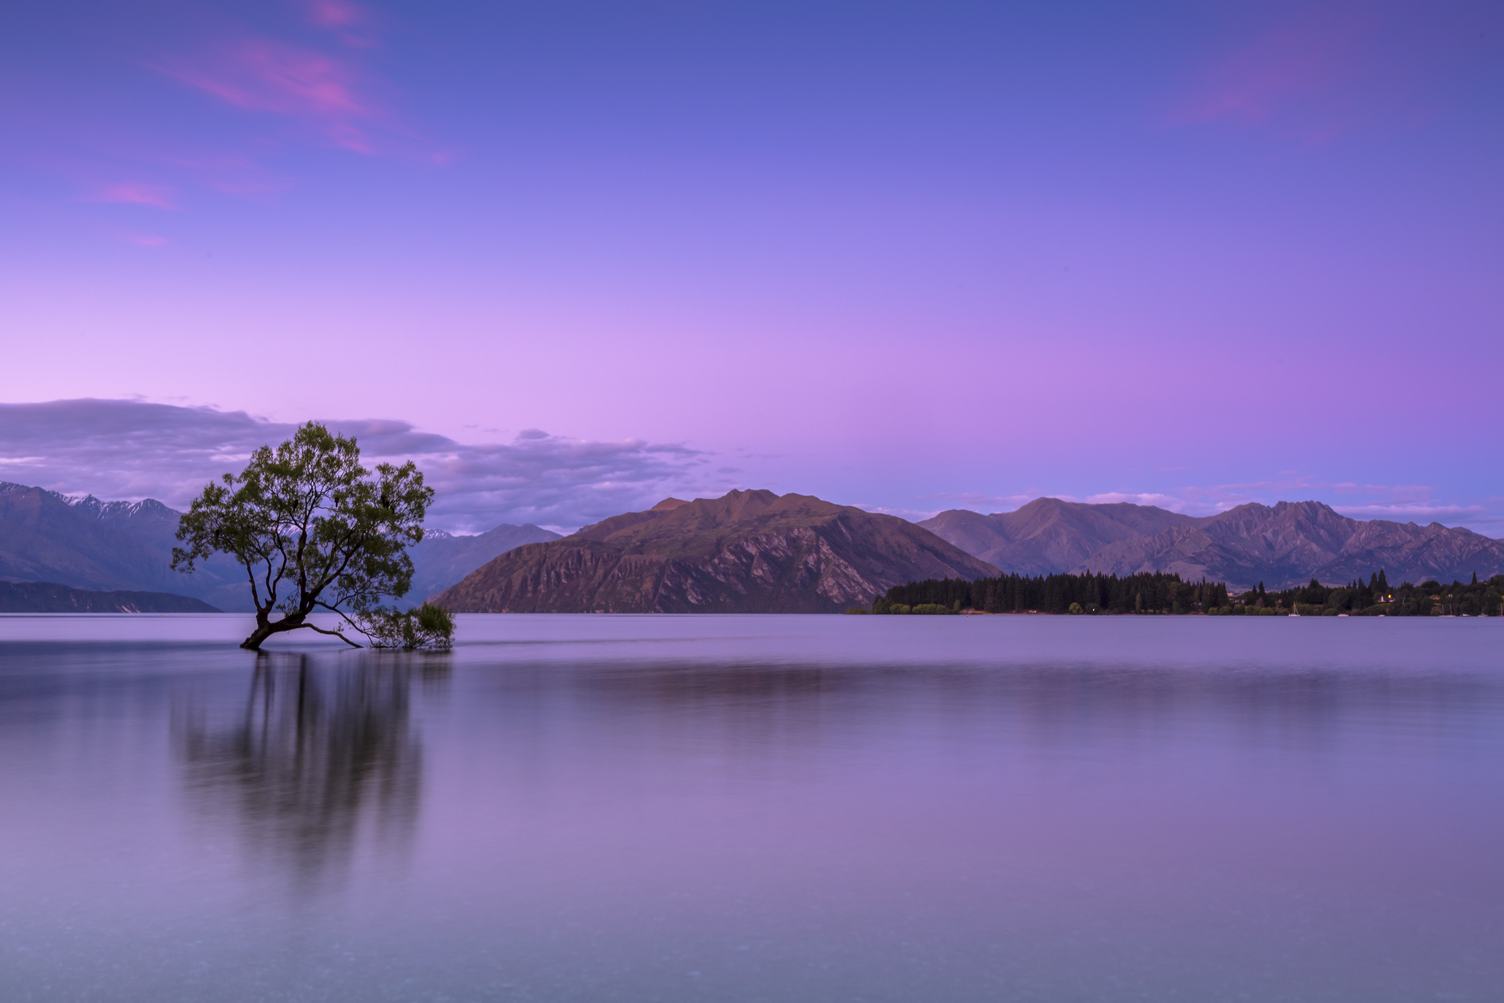 Violet Mountain Landscape with Lake and Tree in the Water